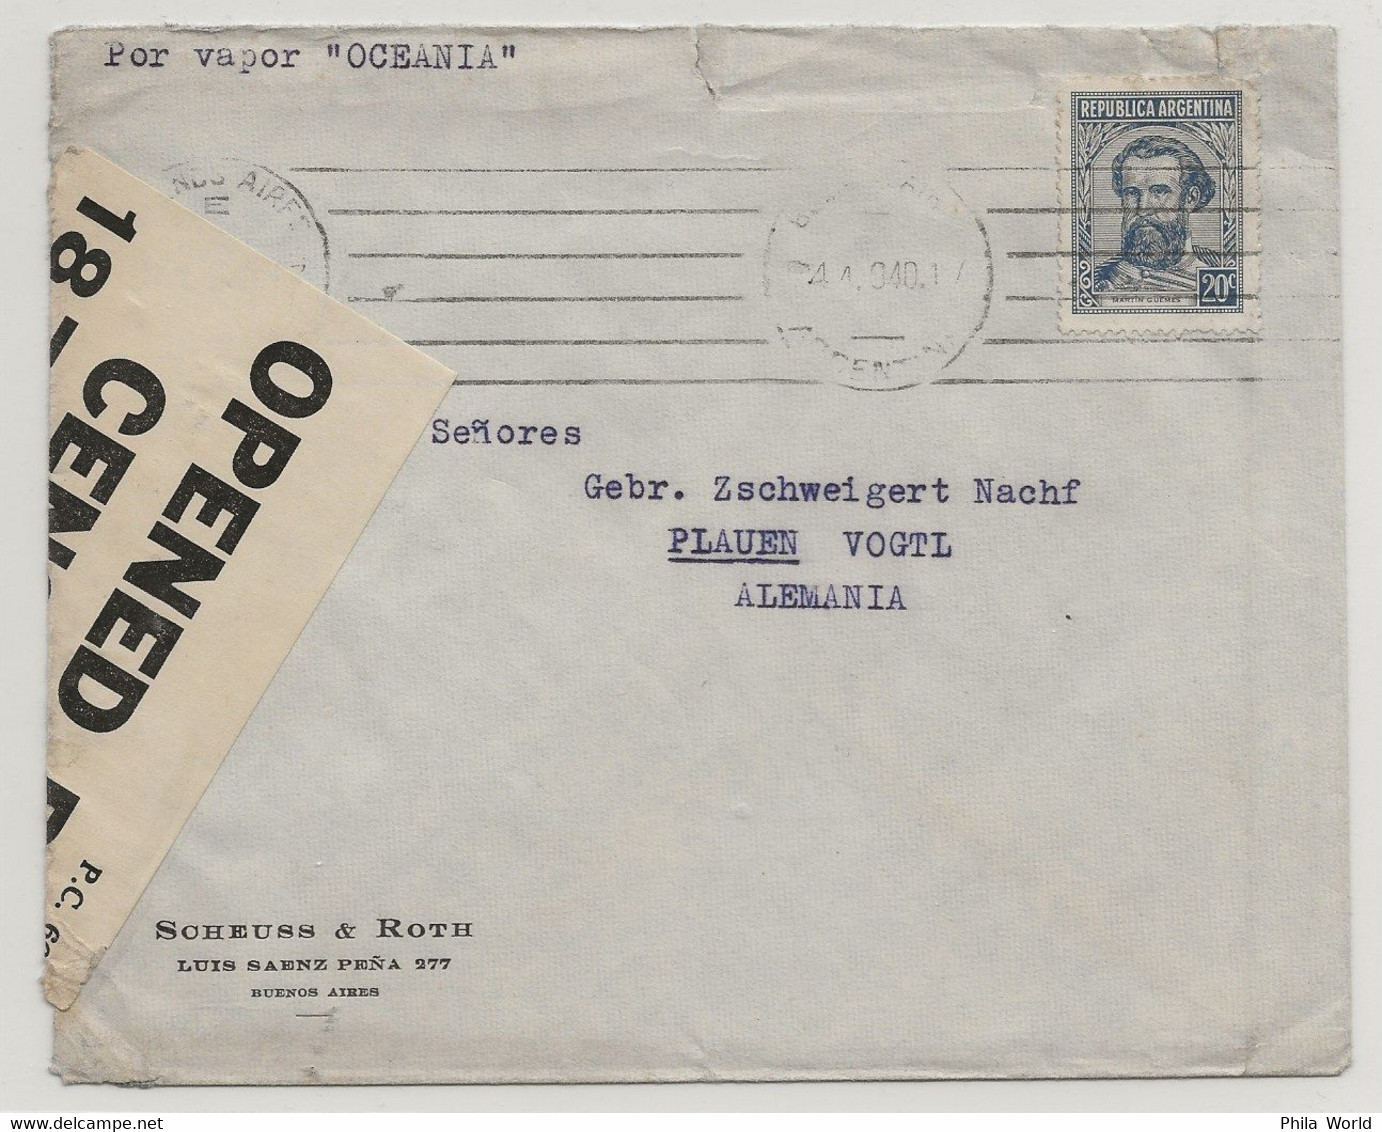 WW2 1940 ARGENTINA Por Vapor OCEANIA Maritime Mail Cover British Censorship 1878 And German Censored To GERMANY - Guerre Mondiale (Seconde)